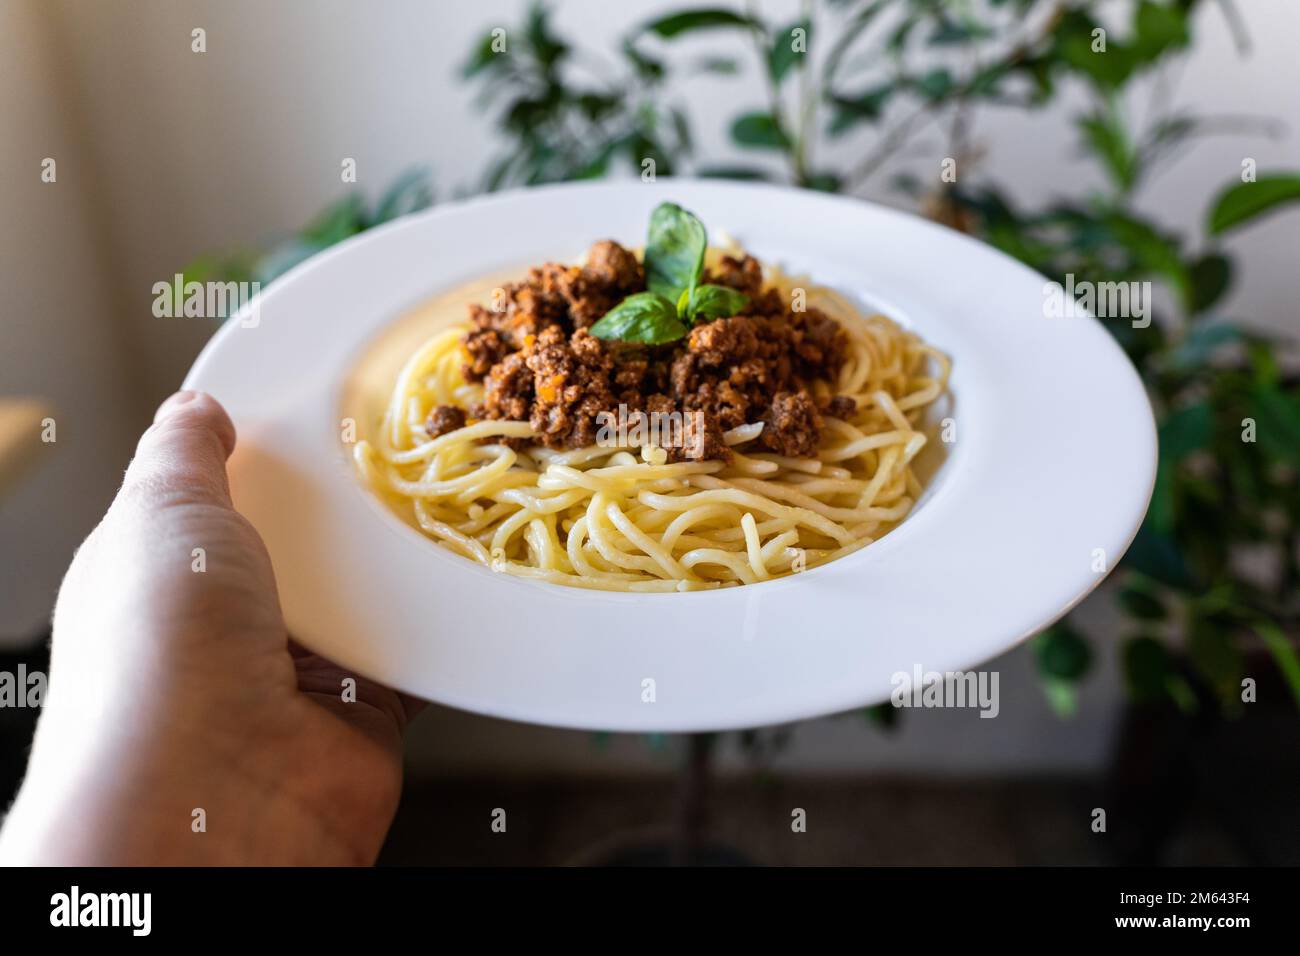 Plate with classic Italian pasta spaghetti bolognese in hand. Stock Photo